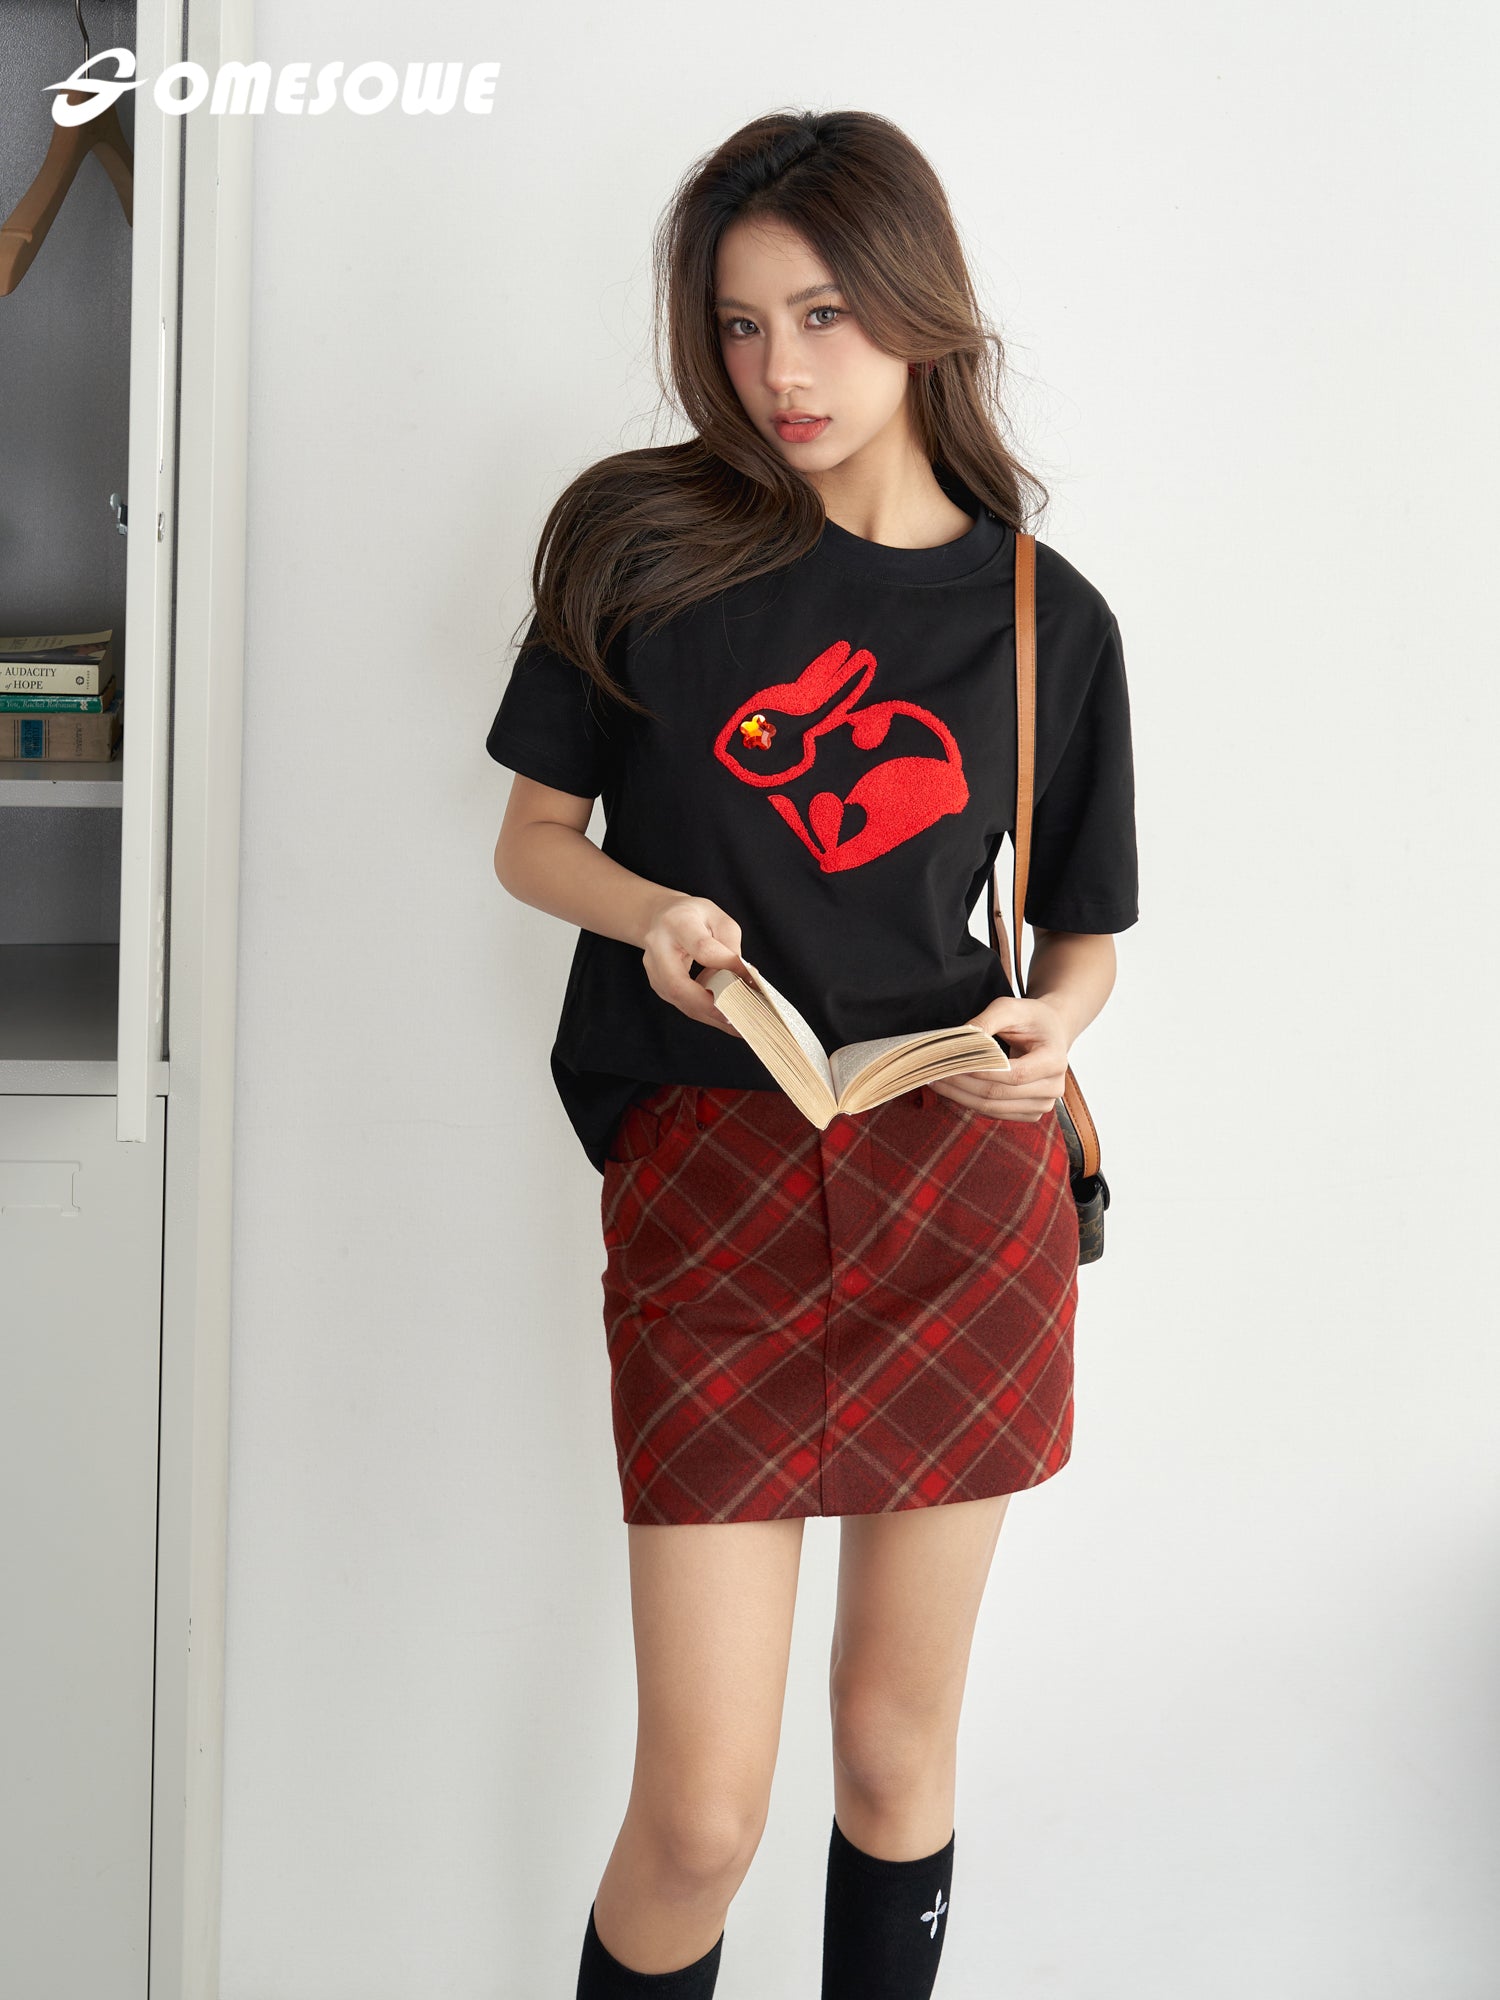 SOMESOWE Black T-Shirt With Red Rabbit Embroidery | MADA IN CHINA